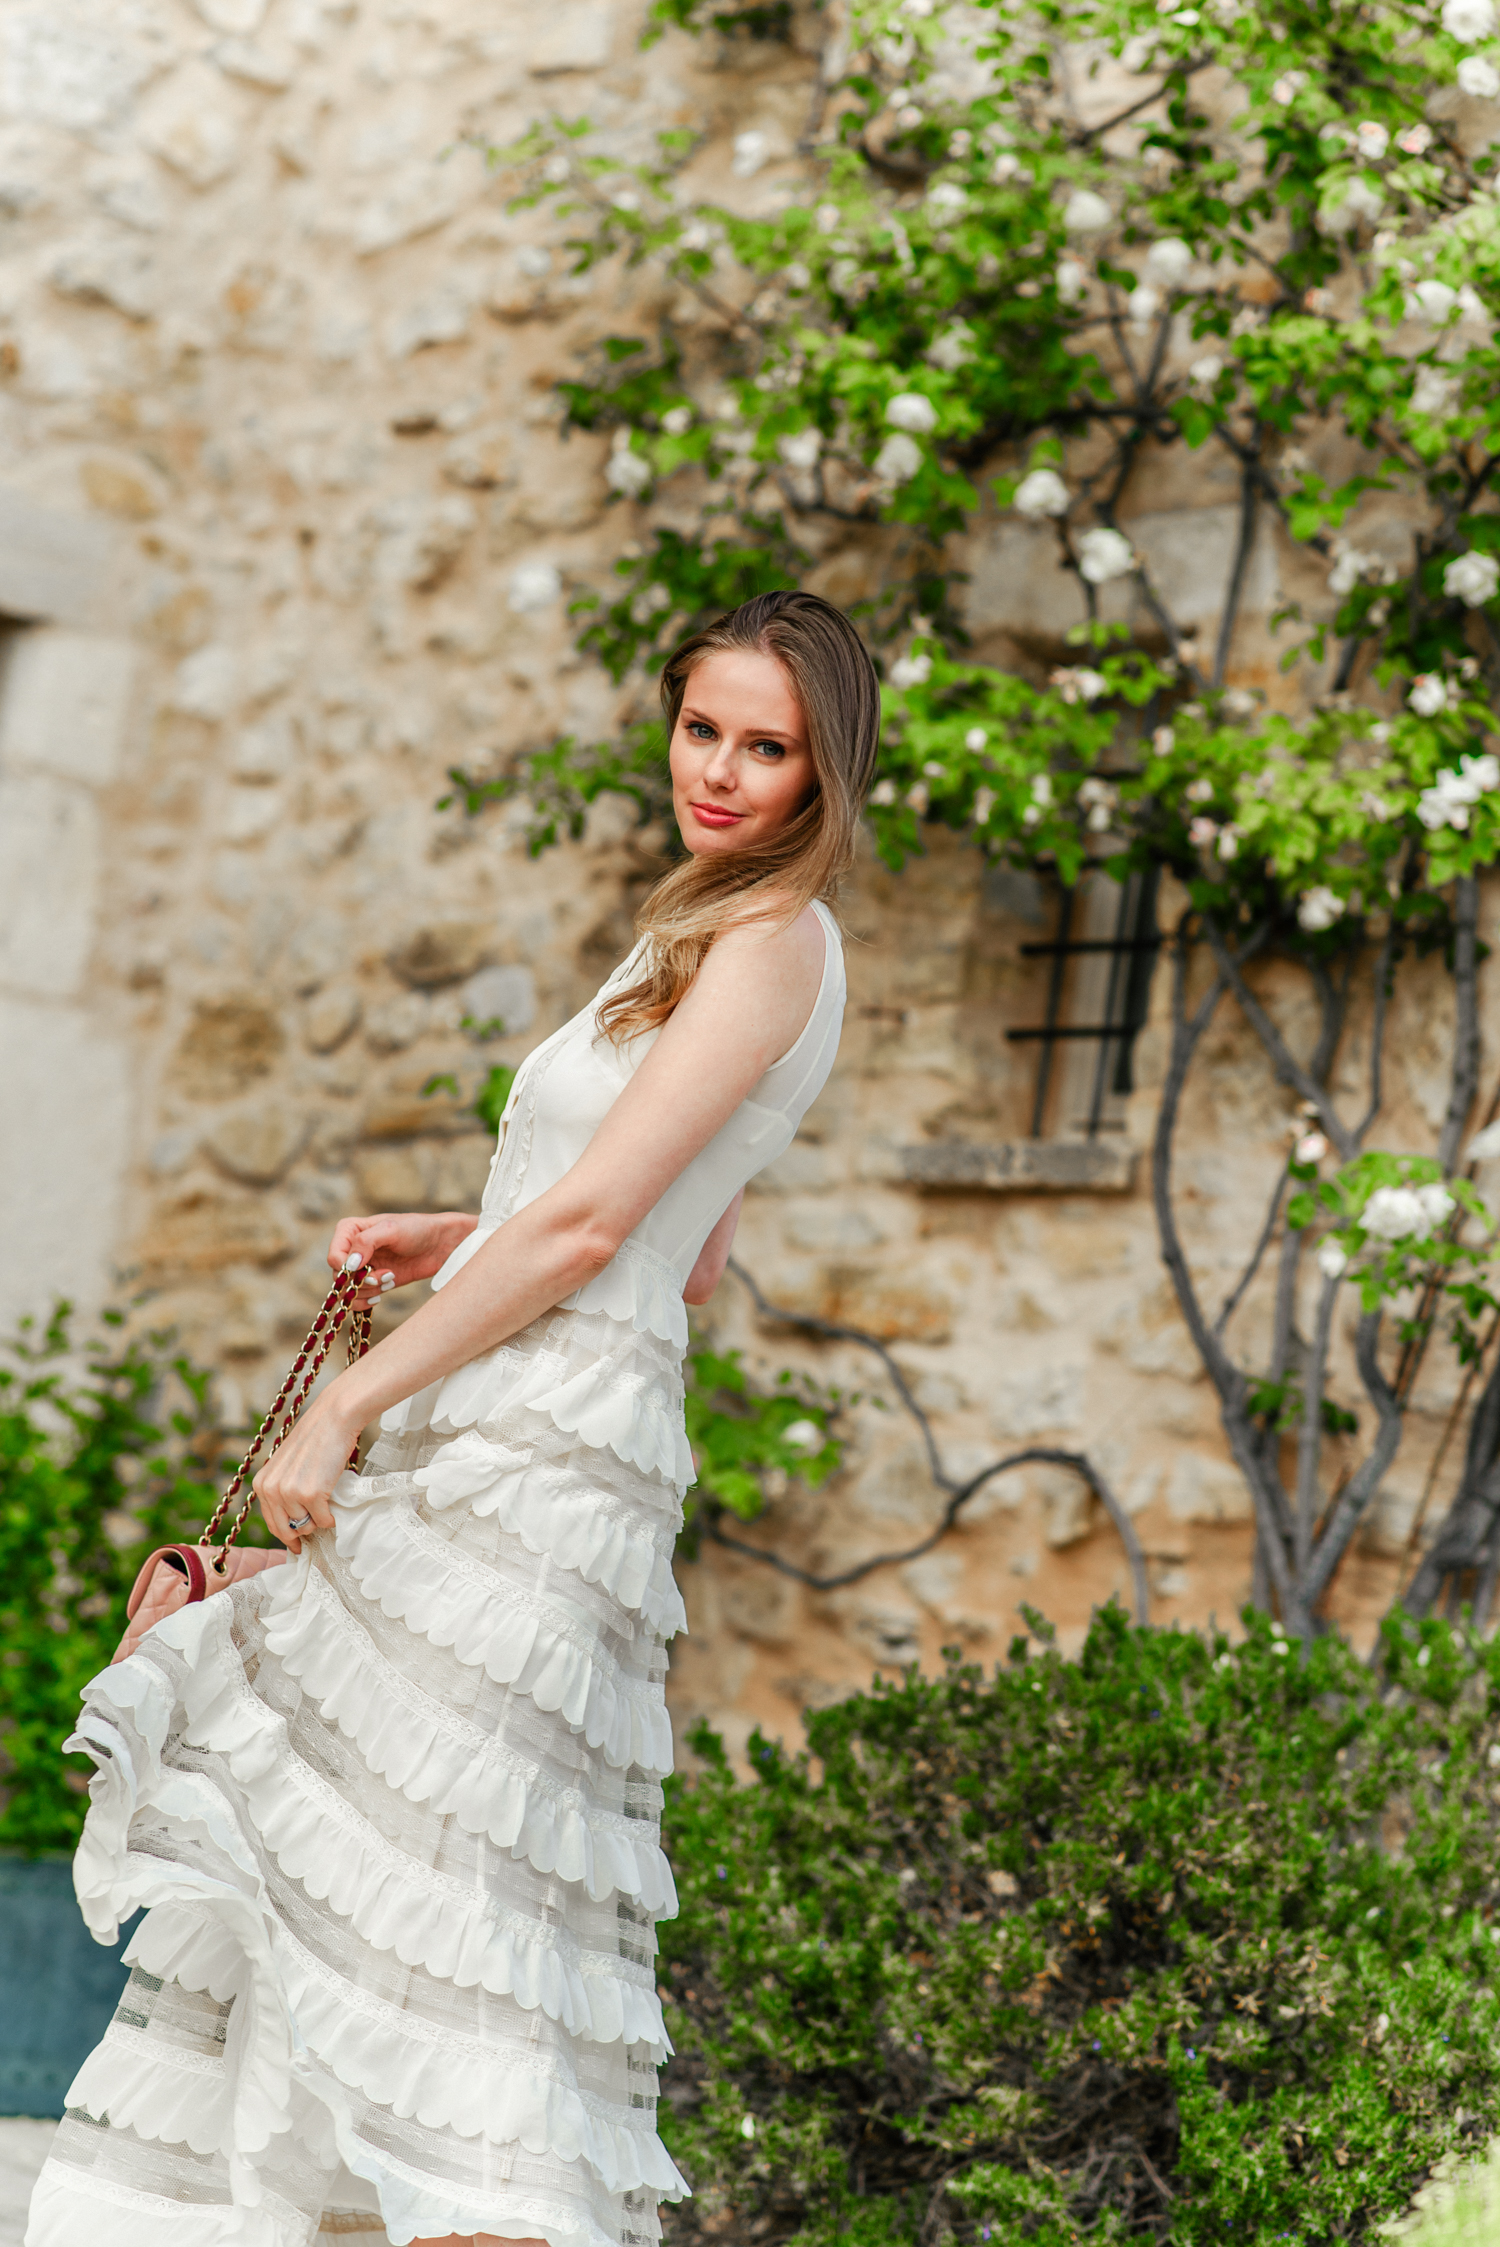 Alyssa Campanella of The A List blog visits La Verrière in Provence, France wearing RED Valentino georgette scalloped dress